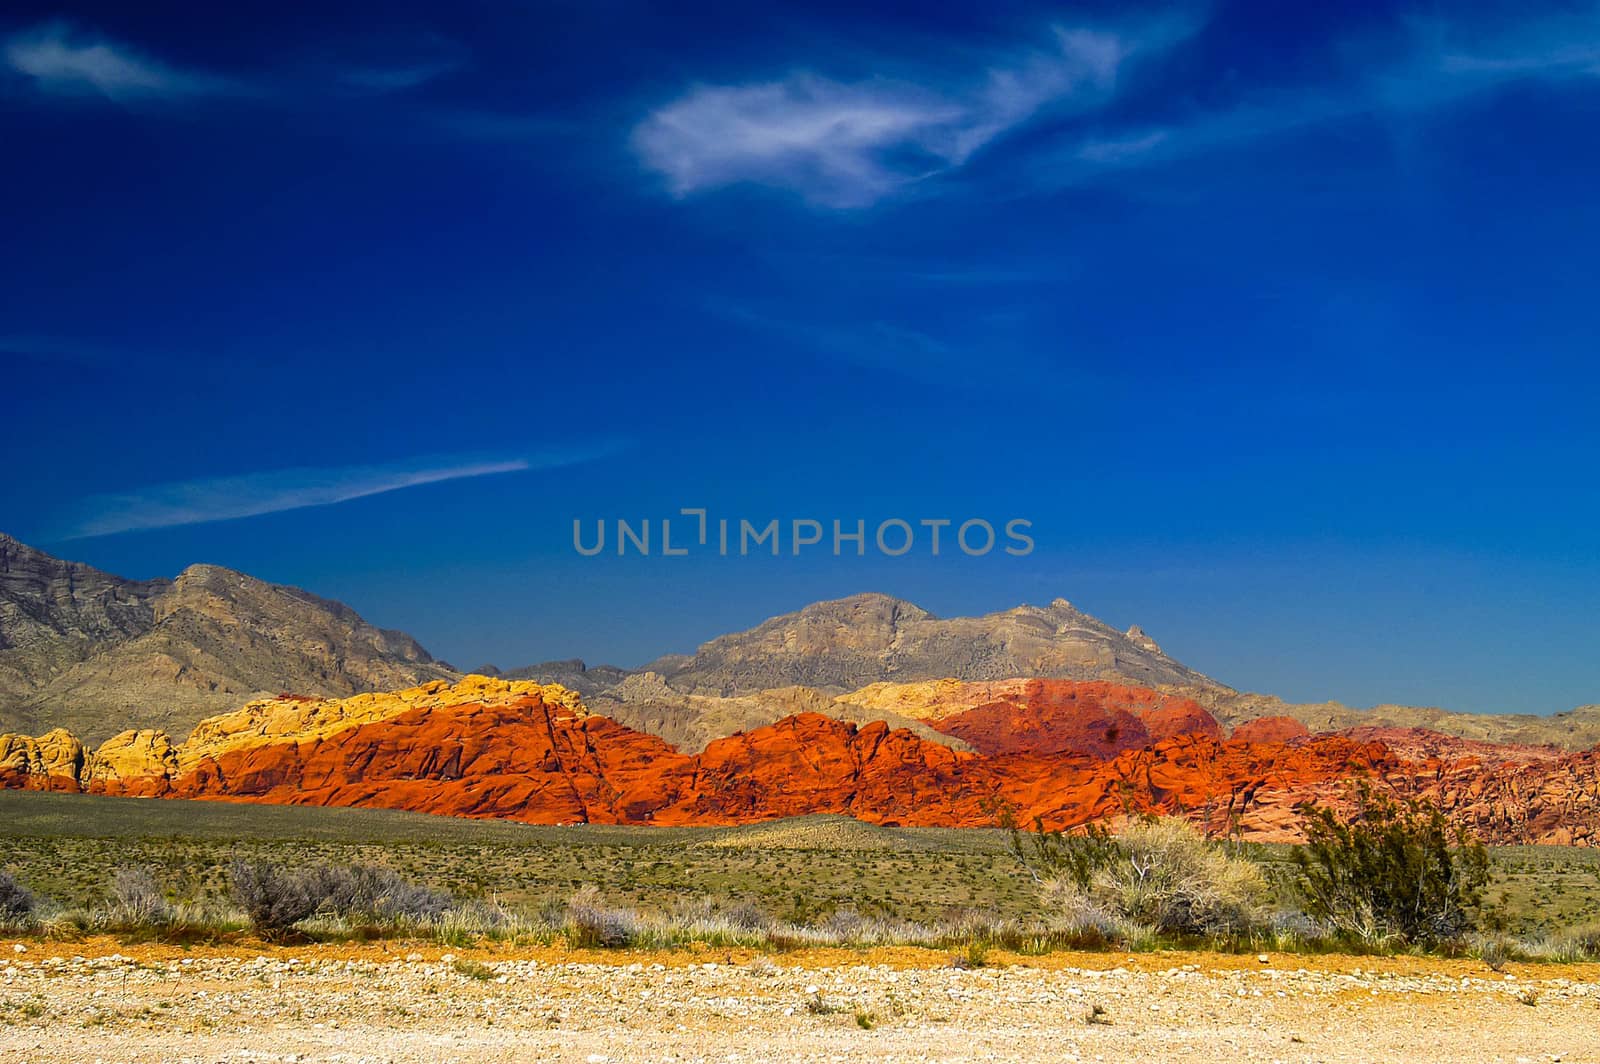 Calico Hills by cestes001